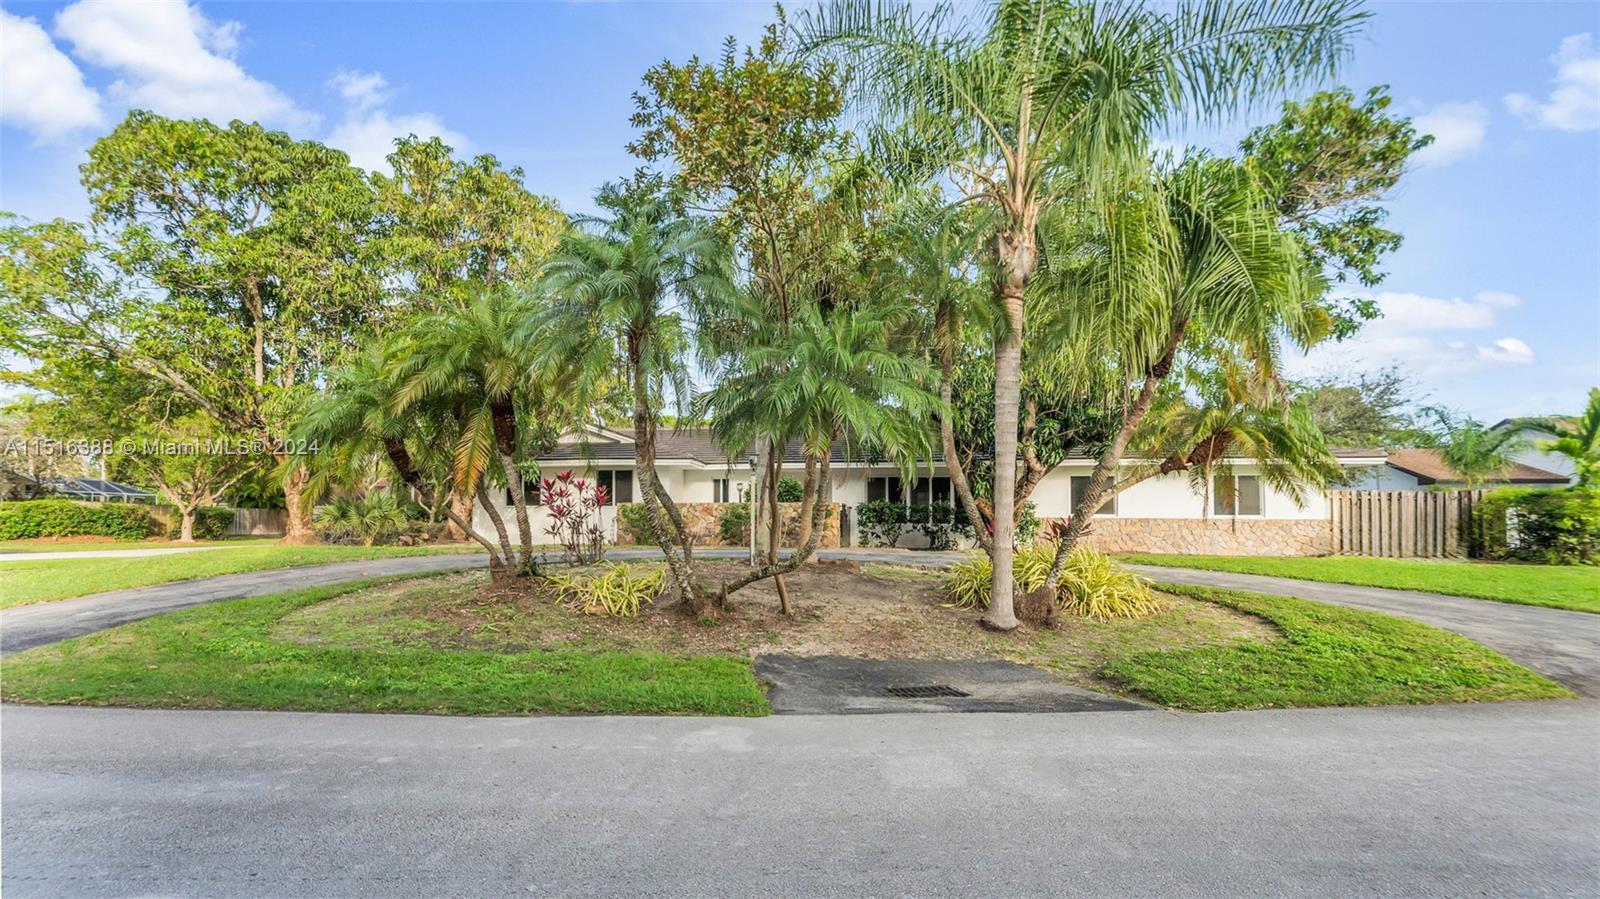 Discover your home in the sought-after neighborhood of Palmetto Bay. This stunning property offers 6